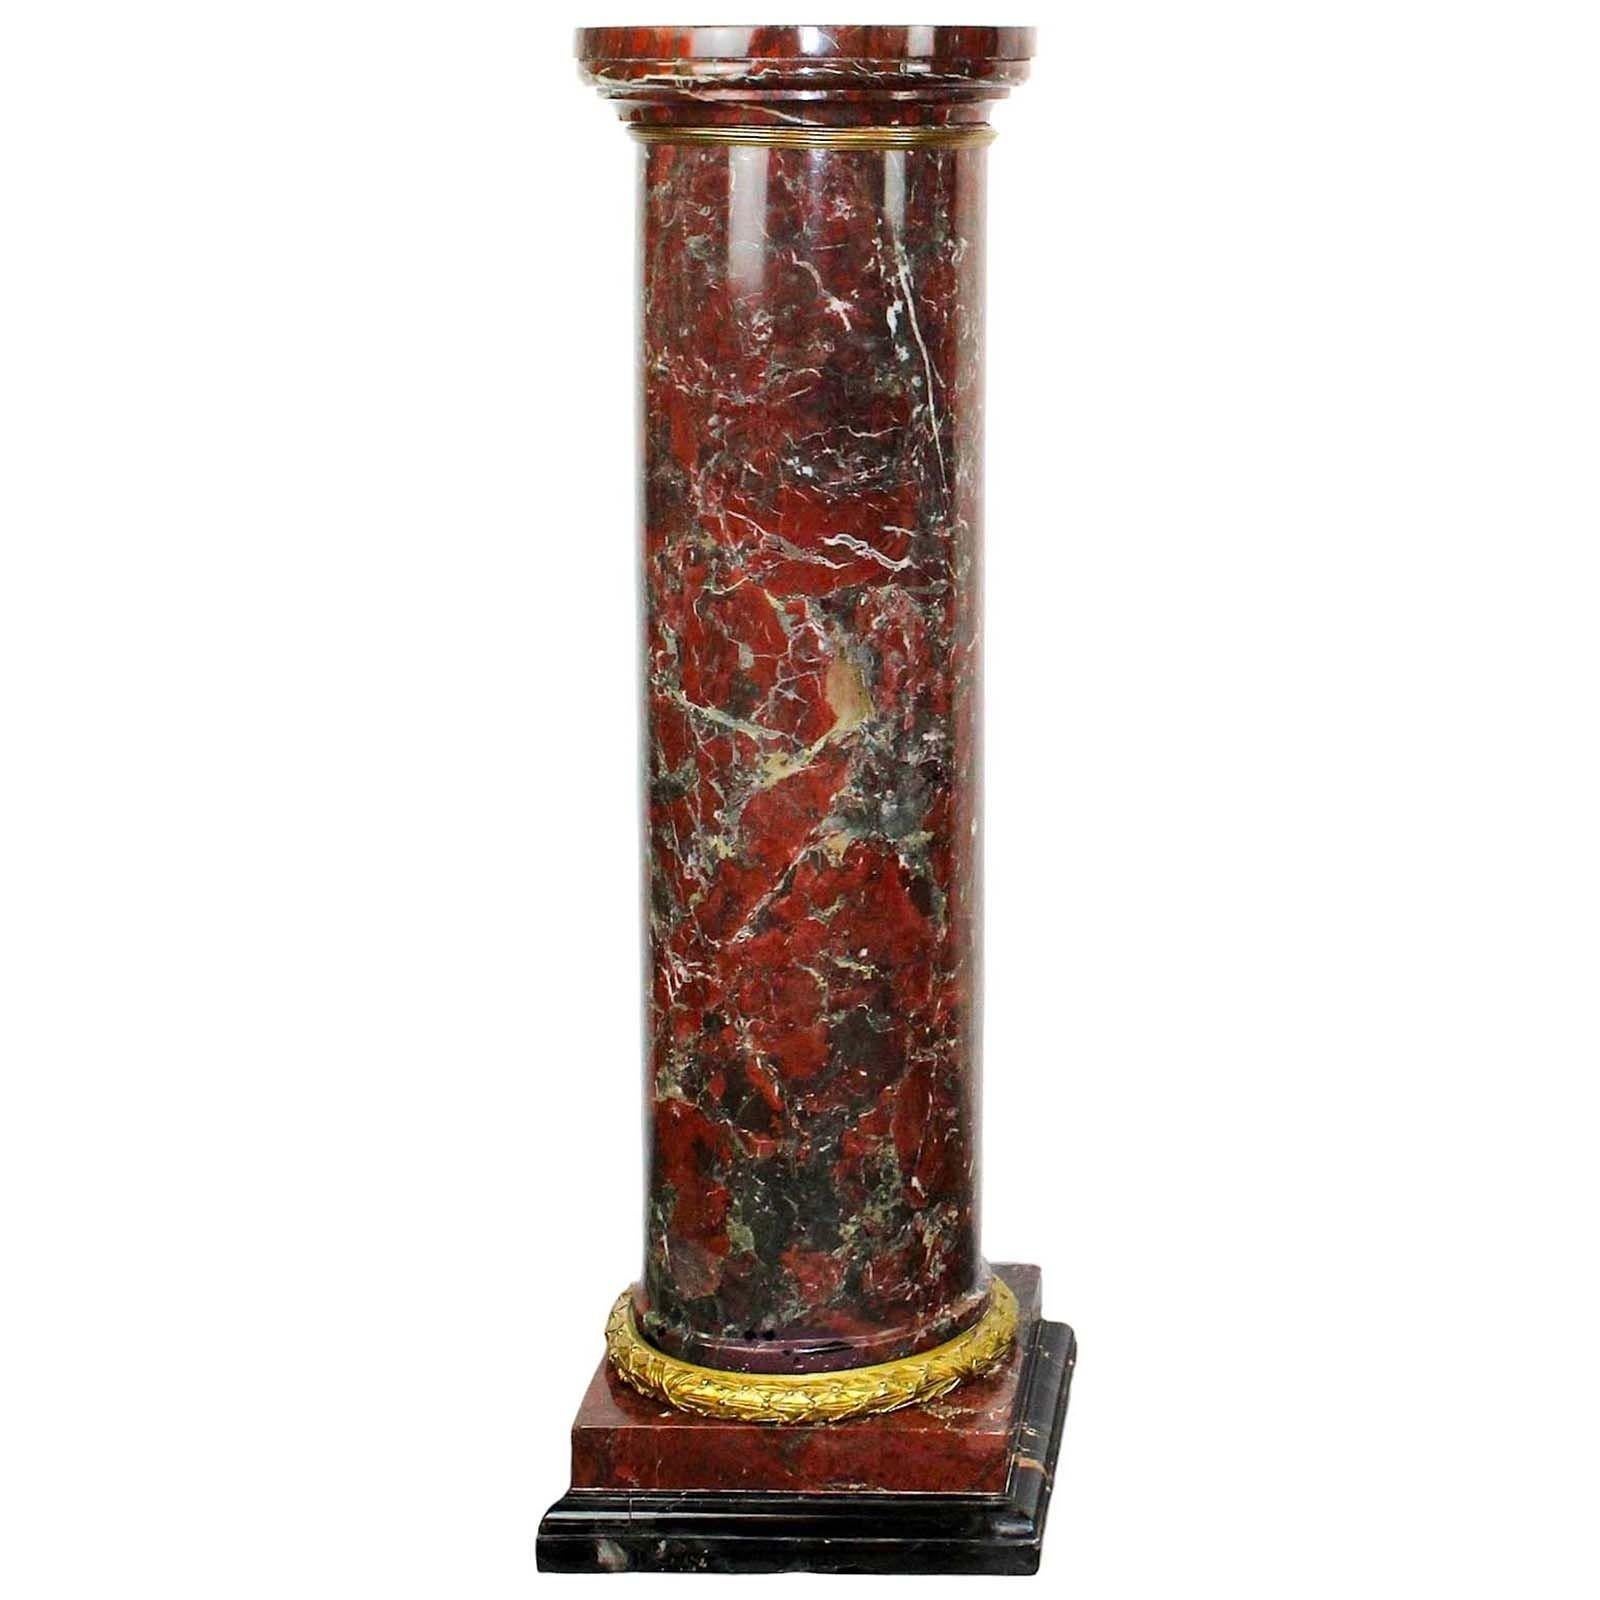 These French Louis XVI columns embody timeless elegance. Crafted from exquisite rouge marble, their deep red tones are complemented by intricate gilt bronze trim. The fluted design and balanced proportions add a regal touch. These columns make a